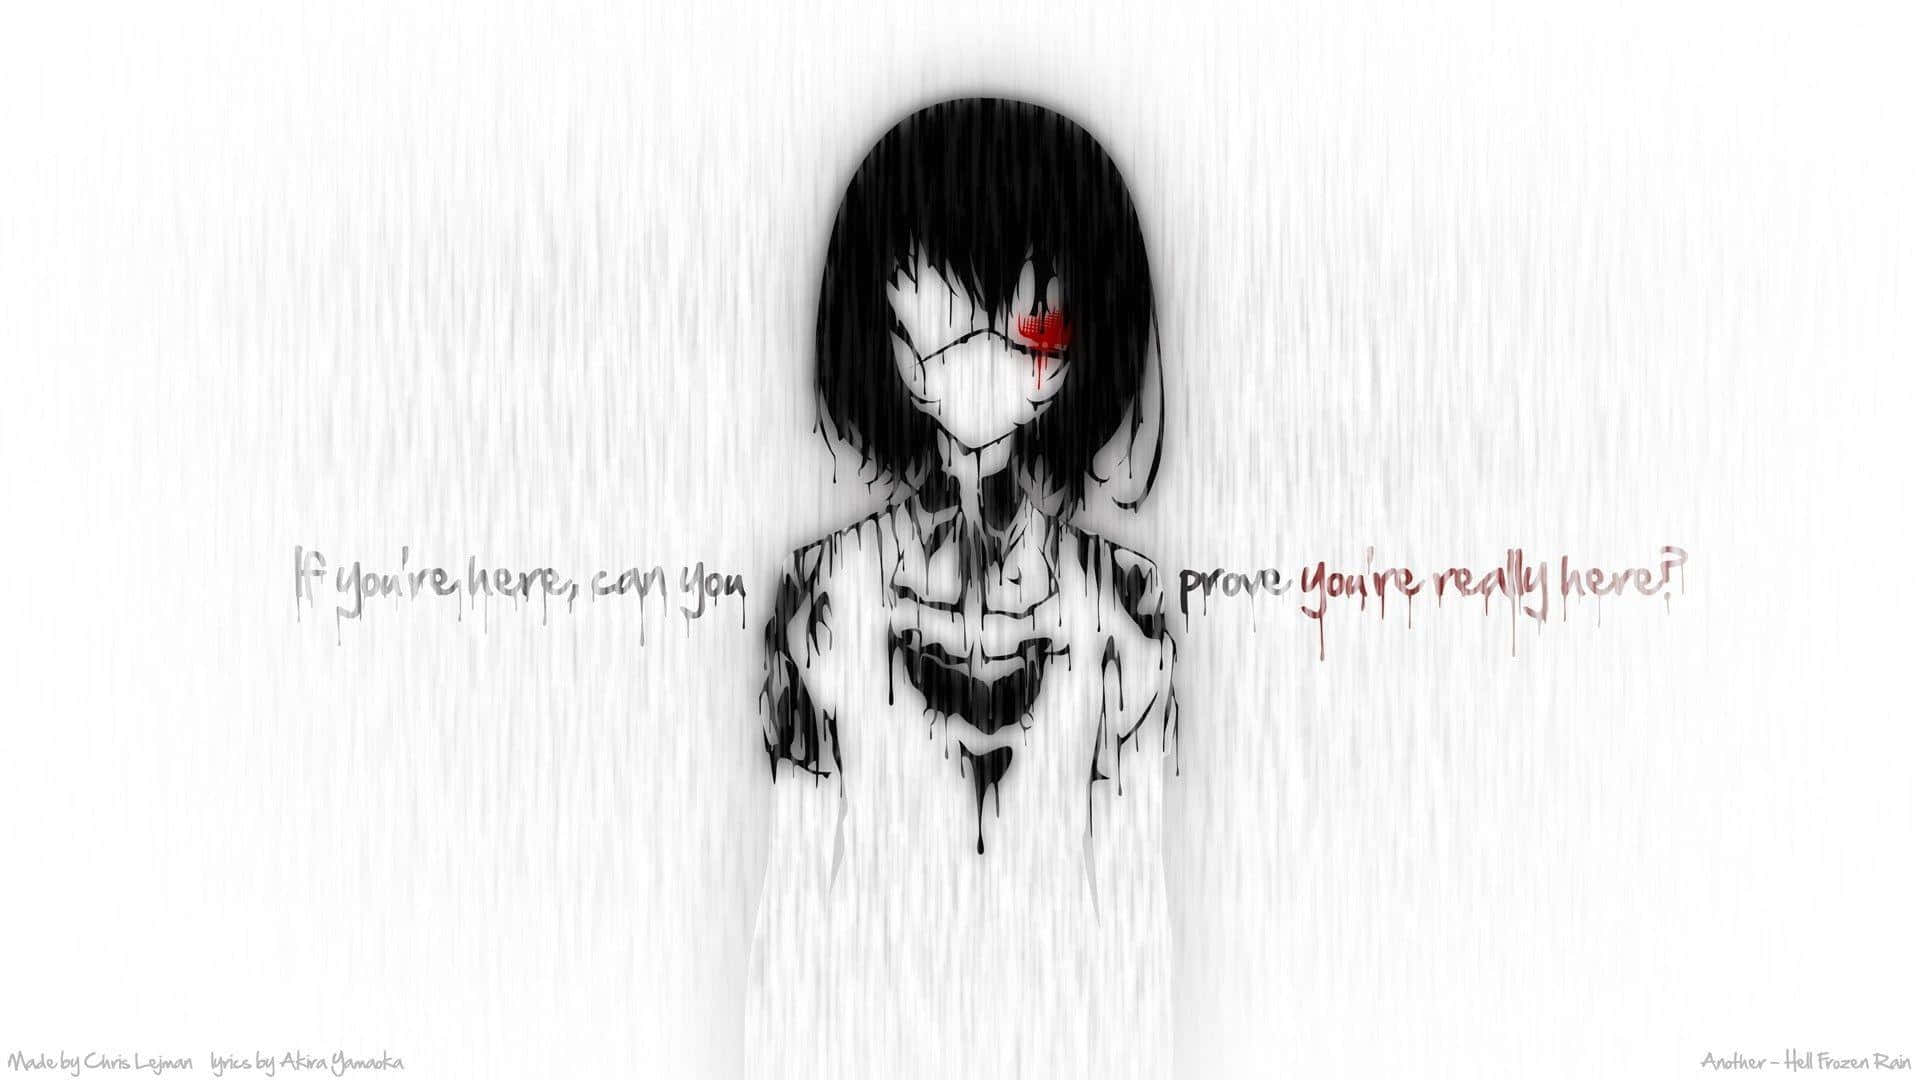 a girl with black hair and a red eye is standing in the rain Wallpaper